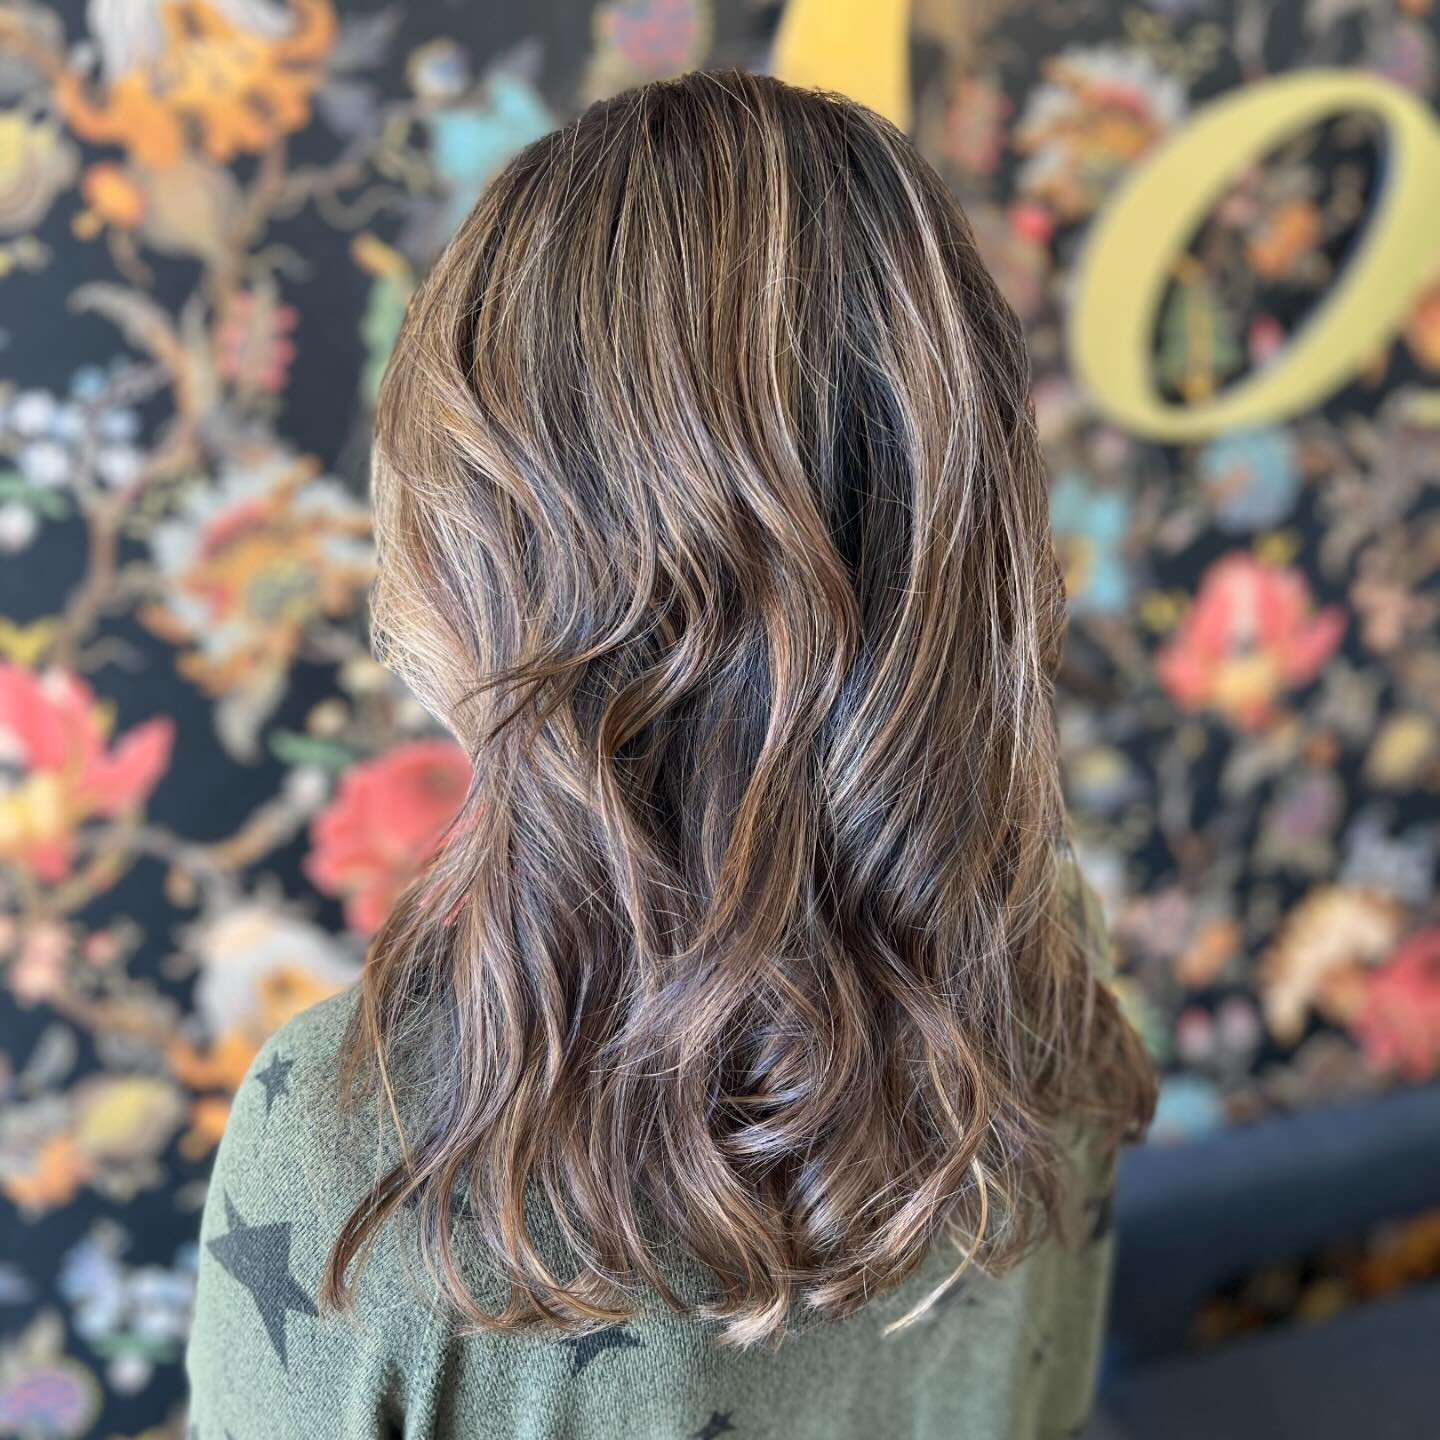 Think of hair color as the makeup for your hair! 💄💋✨ It enhances your features, boosts confidence, and adds a touch of personalization. Thinking about making a change?  DM me to schedule a consultation! 

#brunettehair #brunettebalayage #brunettehi